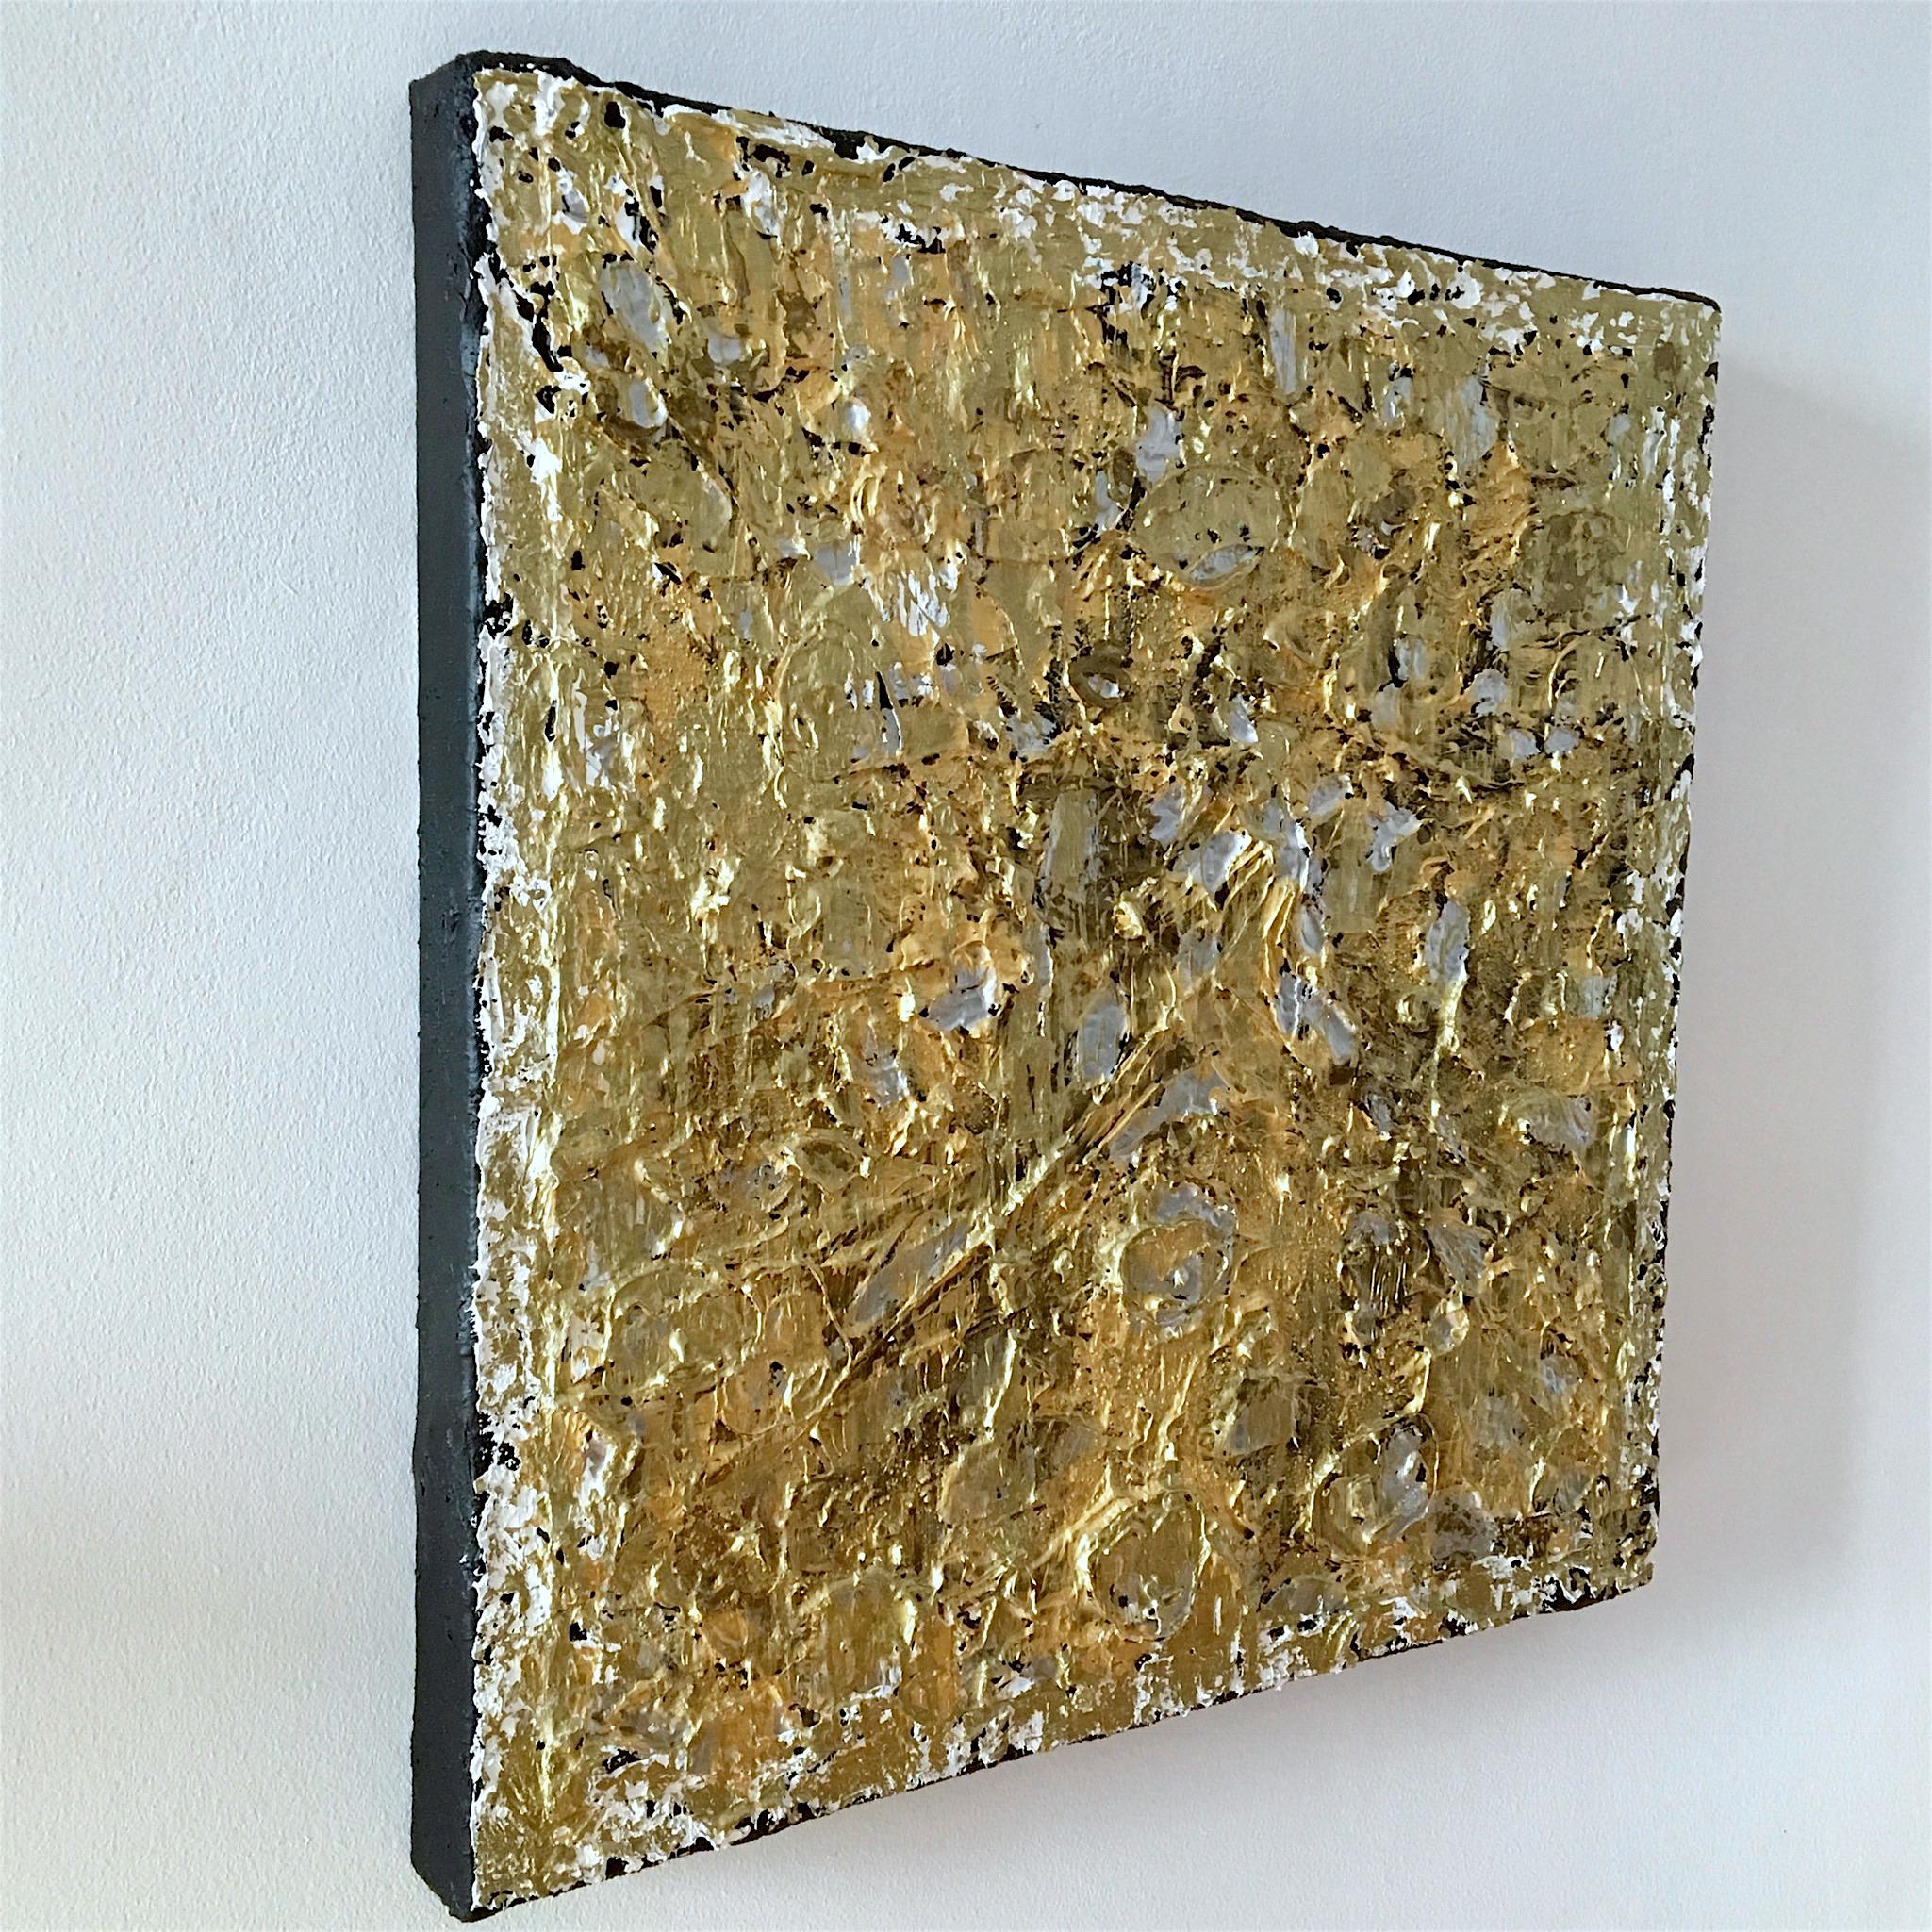 Abstract painting on canvas with heavy texture.
Acrylic and varnish for protection.
Colors: Black, silver and gold.
This painting is called J'Adore 3 and numbered 221.
Original and signed by the artist, comes with gallery certificate.
 